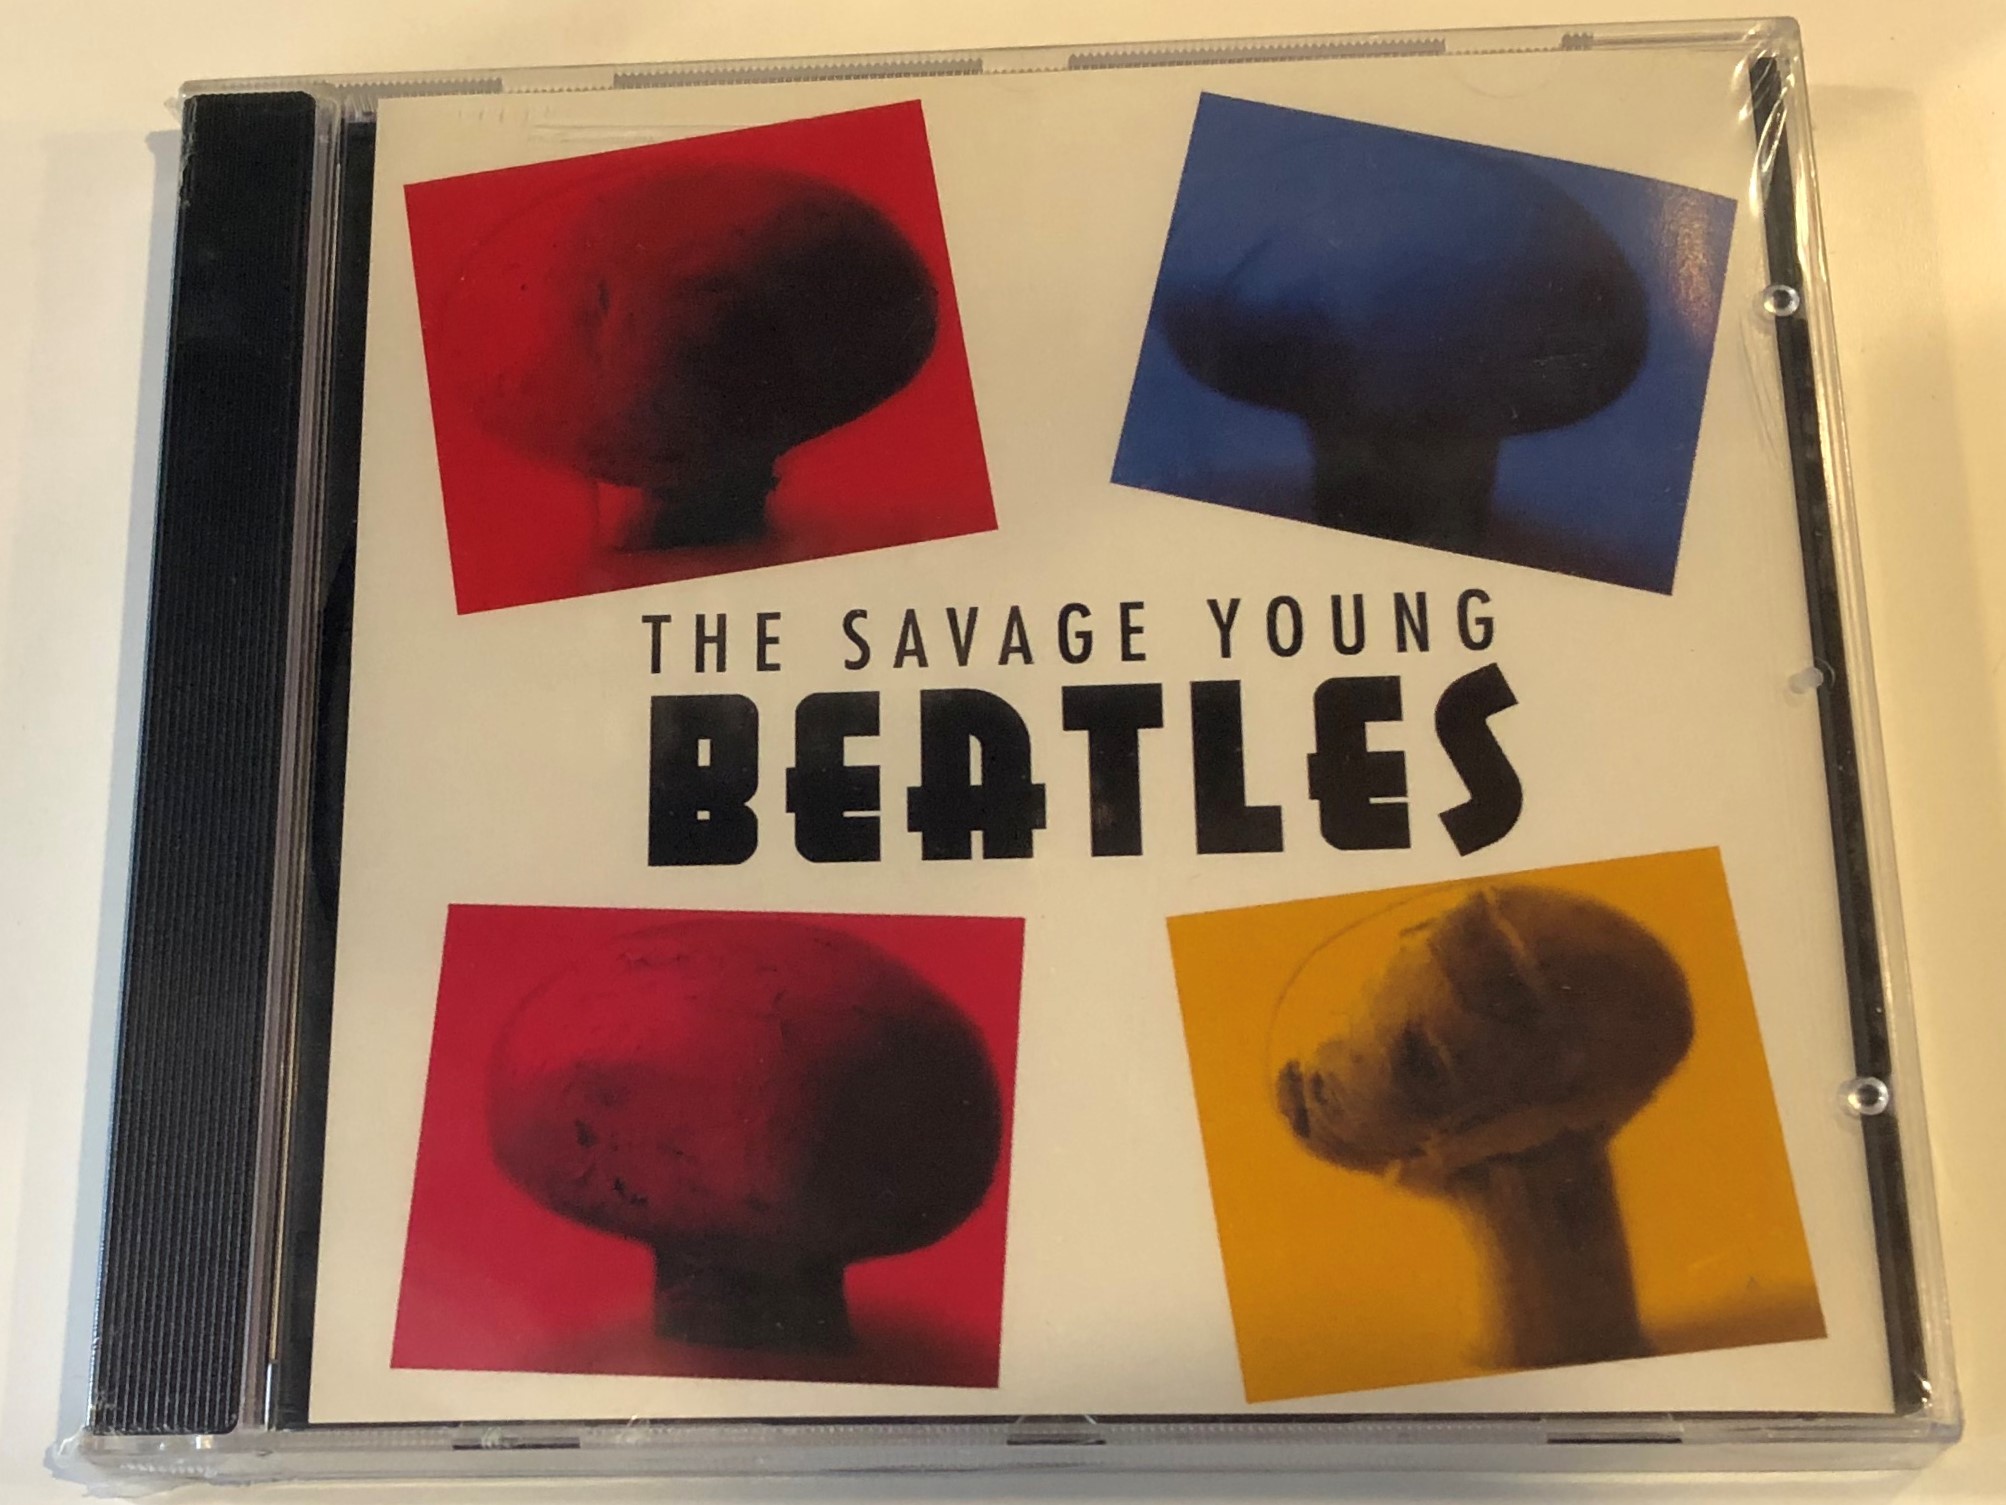 the-savage-young-beatles-fox-music-consolidated-ltd.-audio-cd-fu-1028-1-.jpg